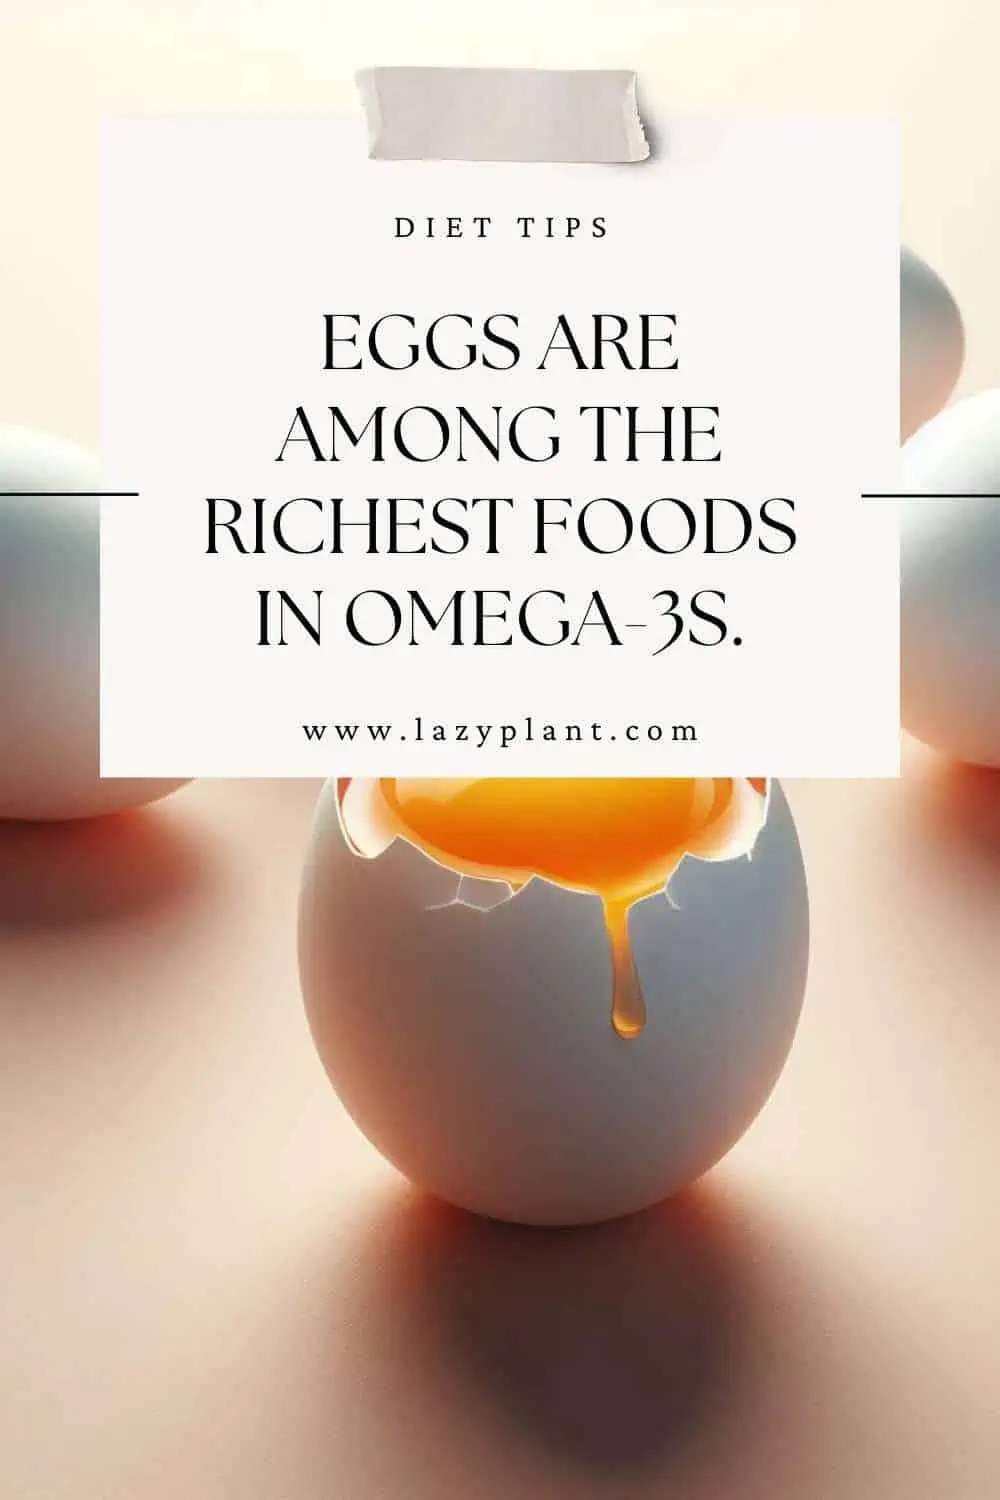 Eggs are rich in Omega-3s!